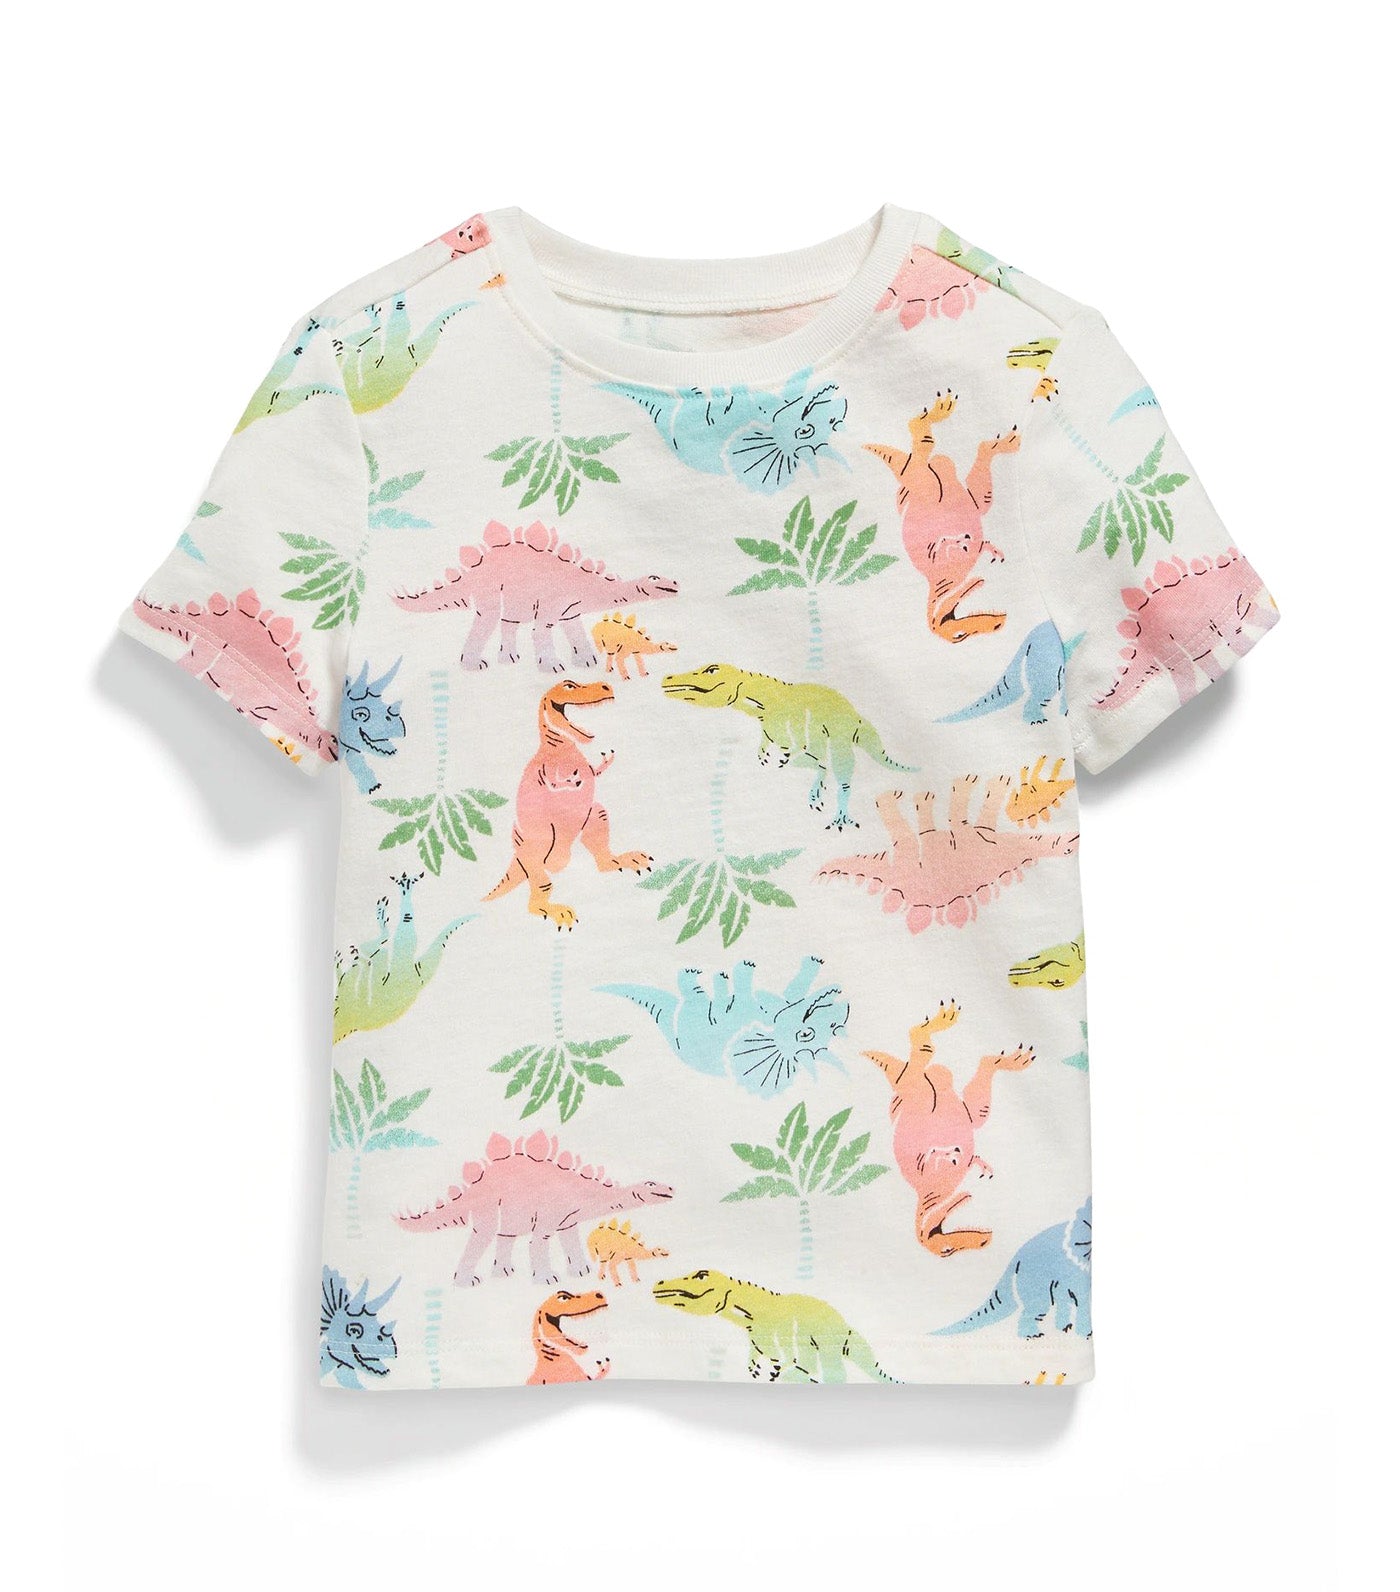 Unisex Printed T-Shirt for Toddler - Dino Attack